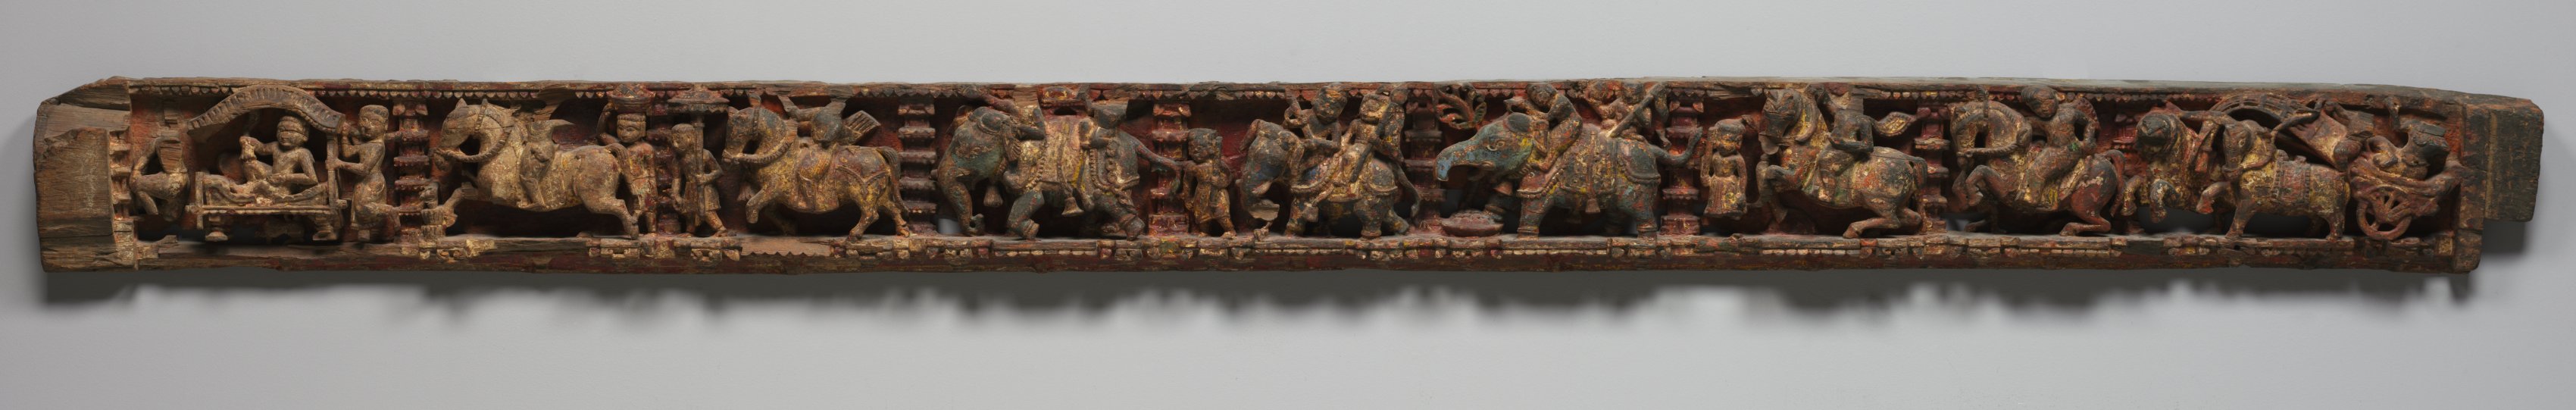 Narrative Frieze:  Procession with Dignitary in a Palanquin Architrave from a Jain Temple